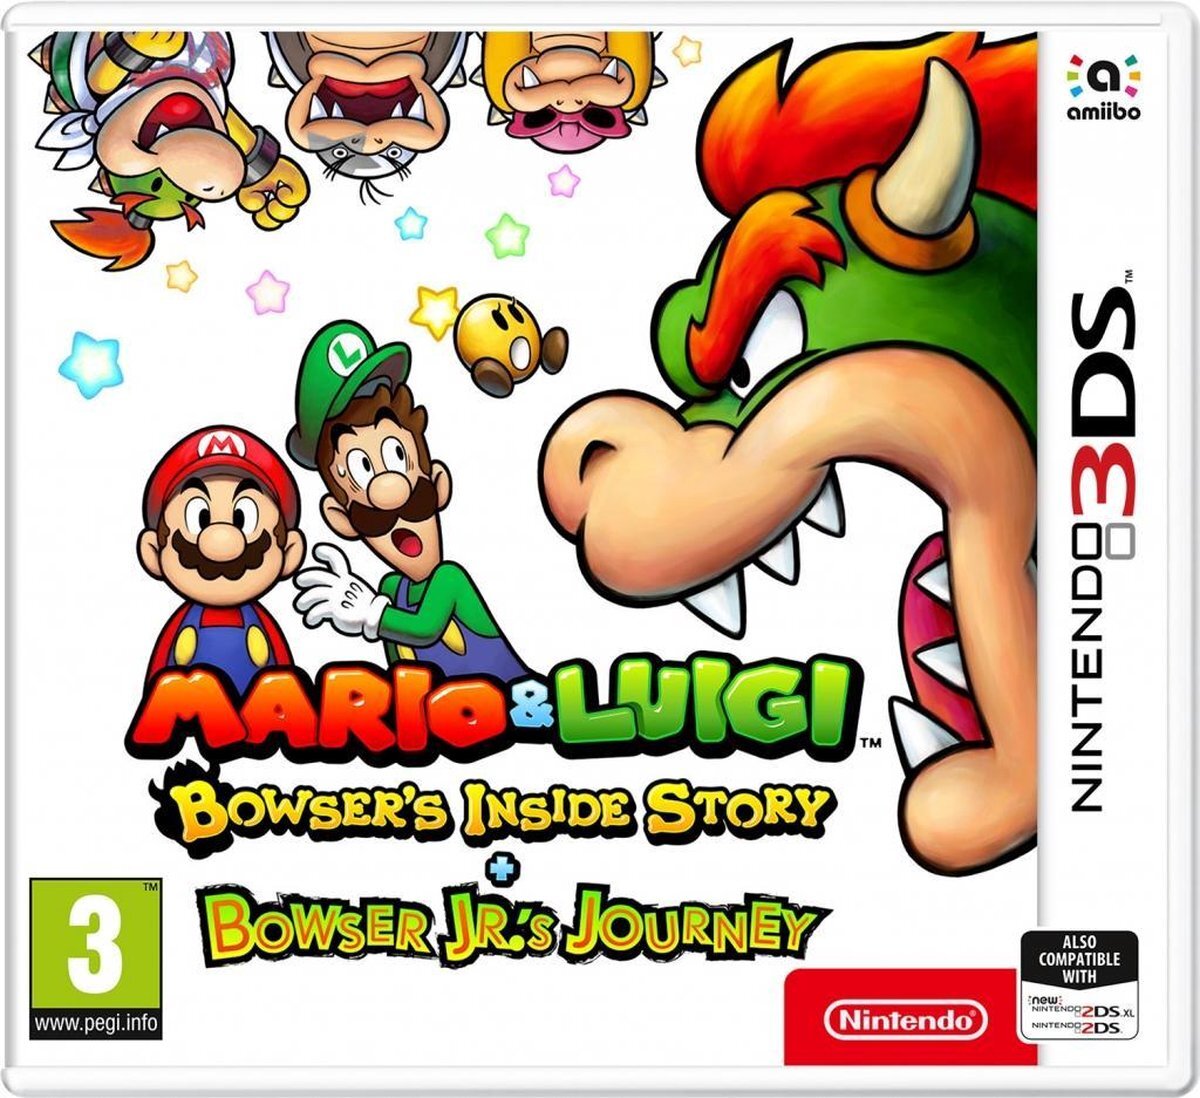 Nintendo Mario and Luigi: Bowser's Inside Story and Bowser Jr.'s Journey - 3DS Nintendo 3DS